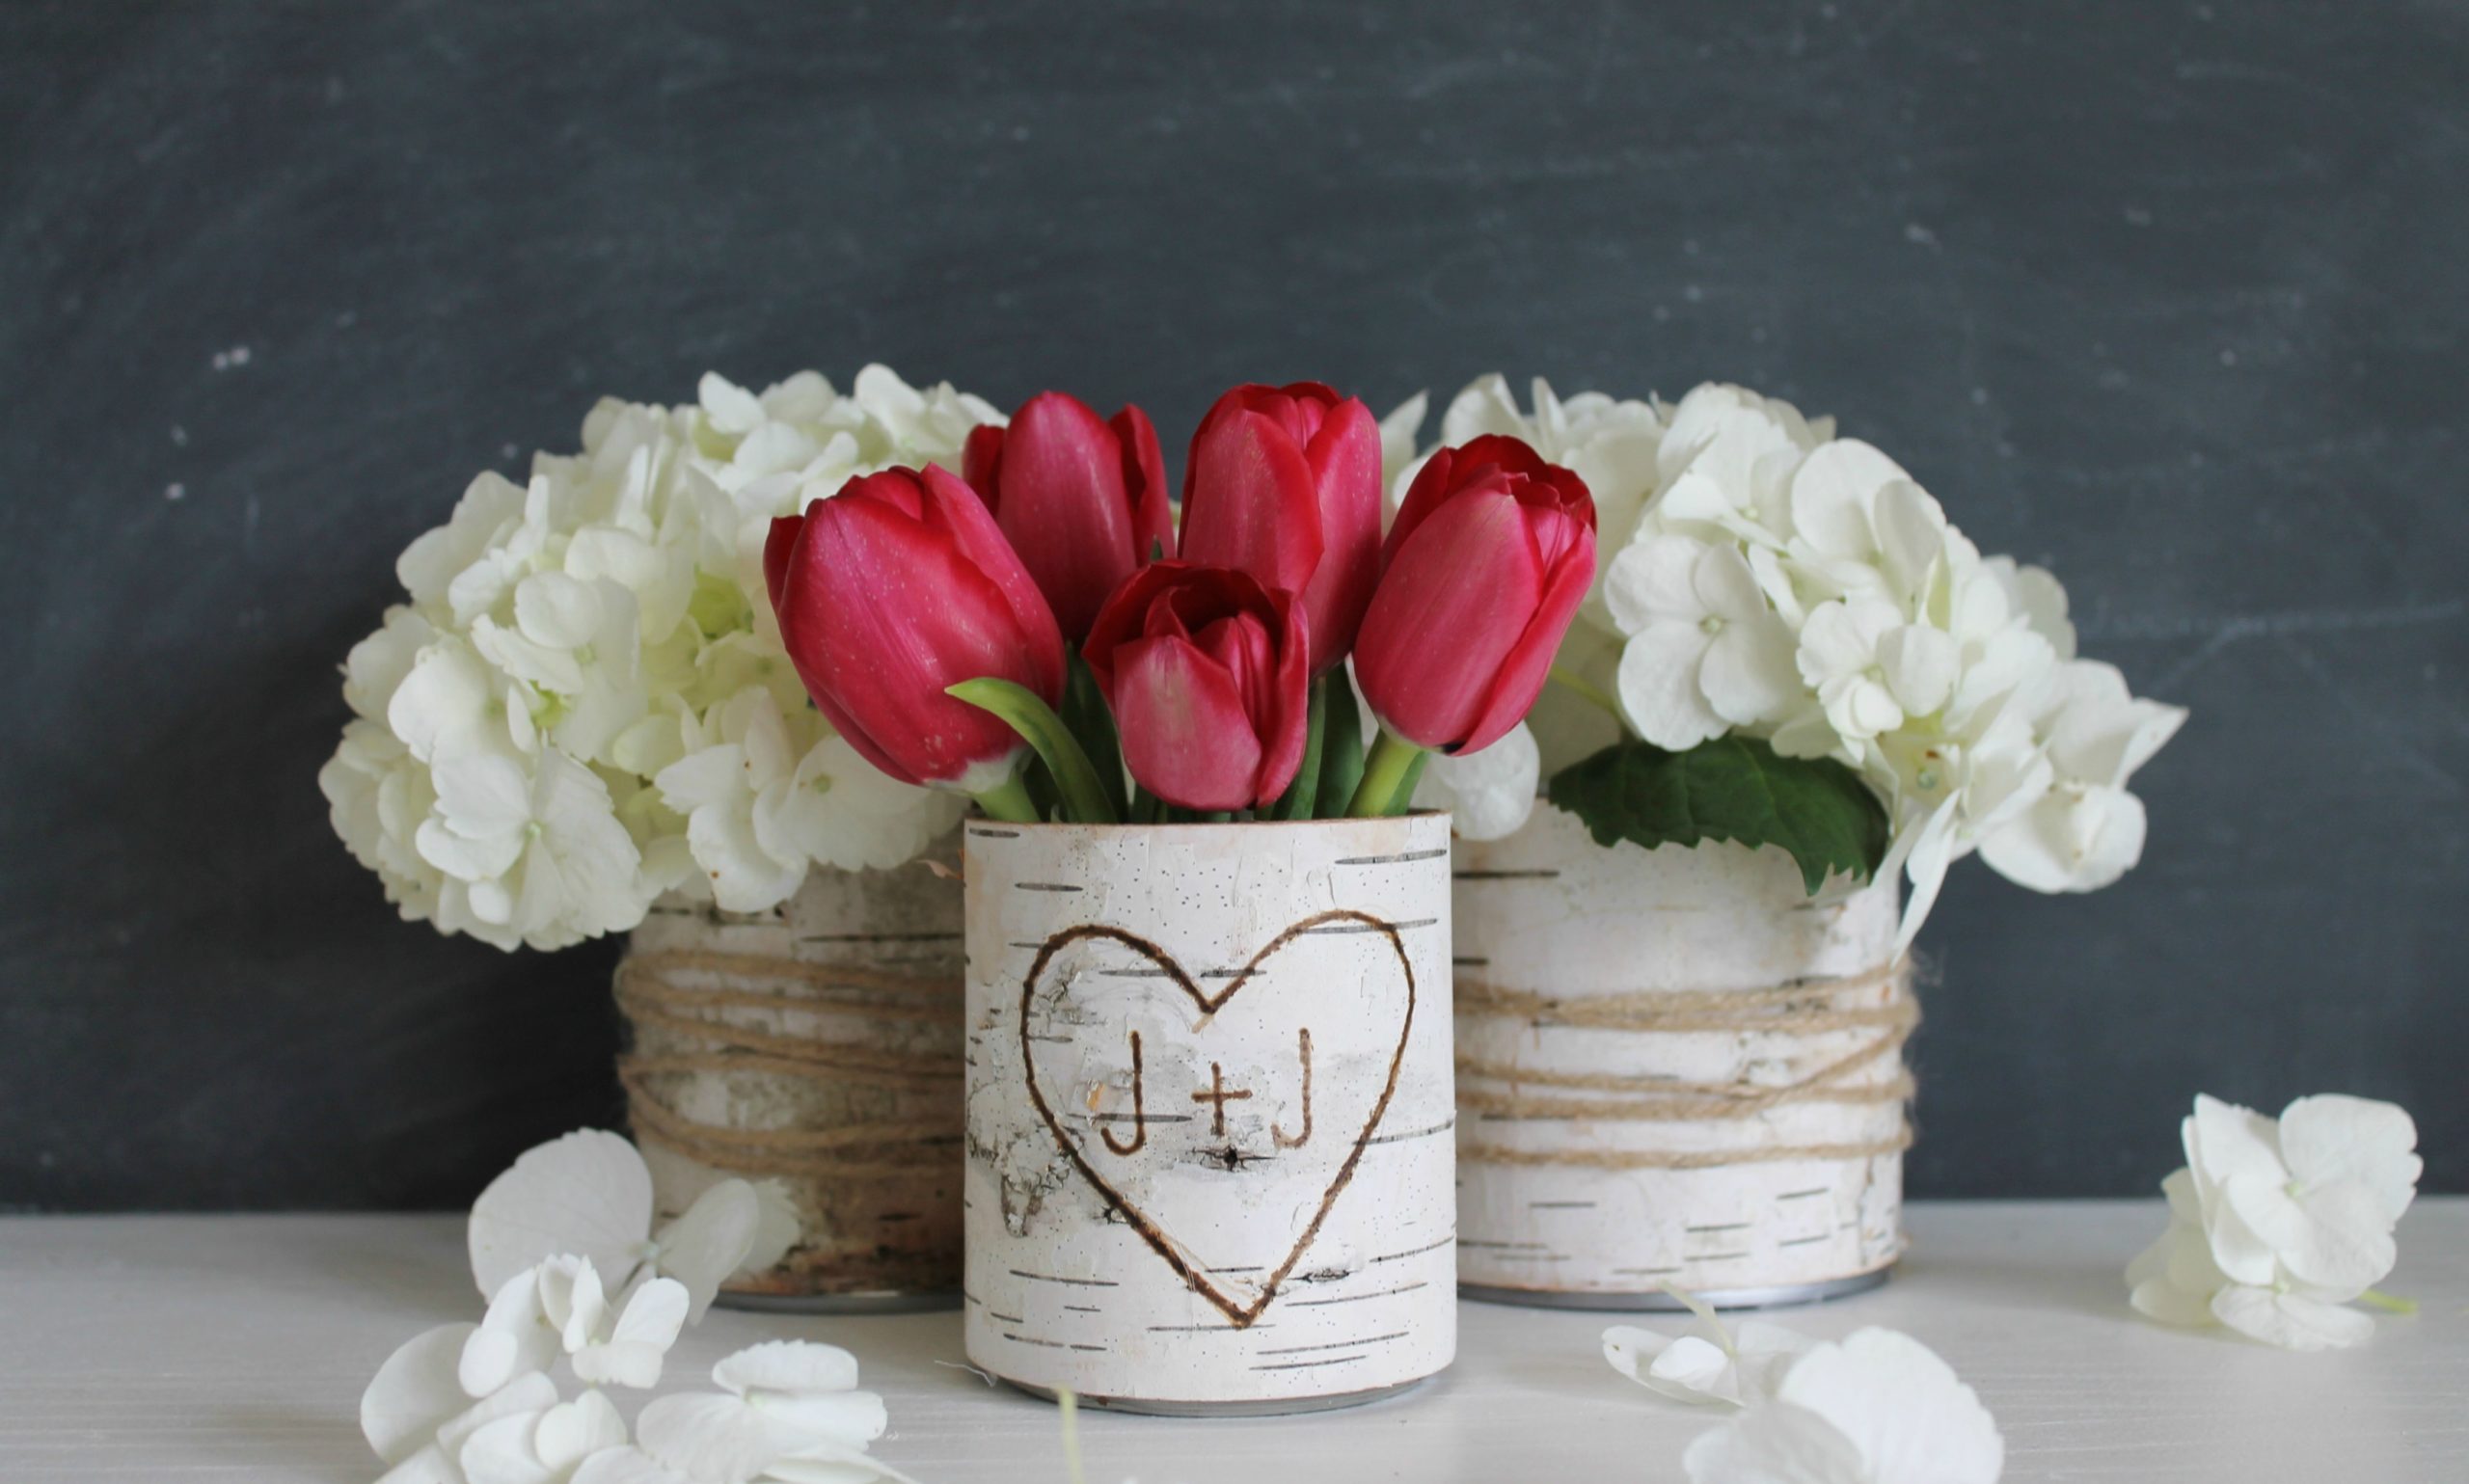 Red tulips in a carved vase in the middle of white flowers